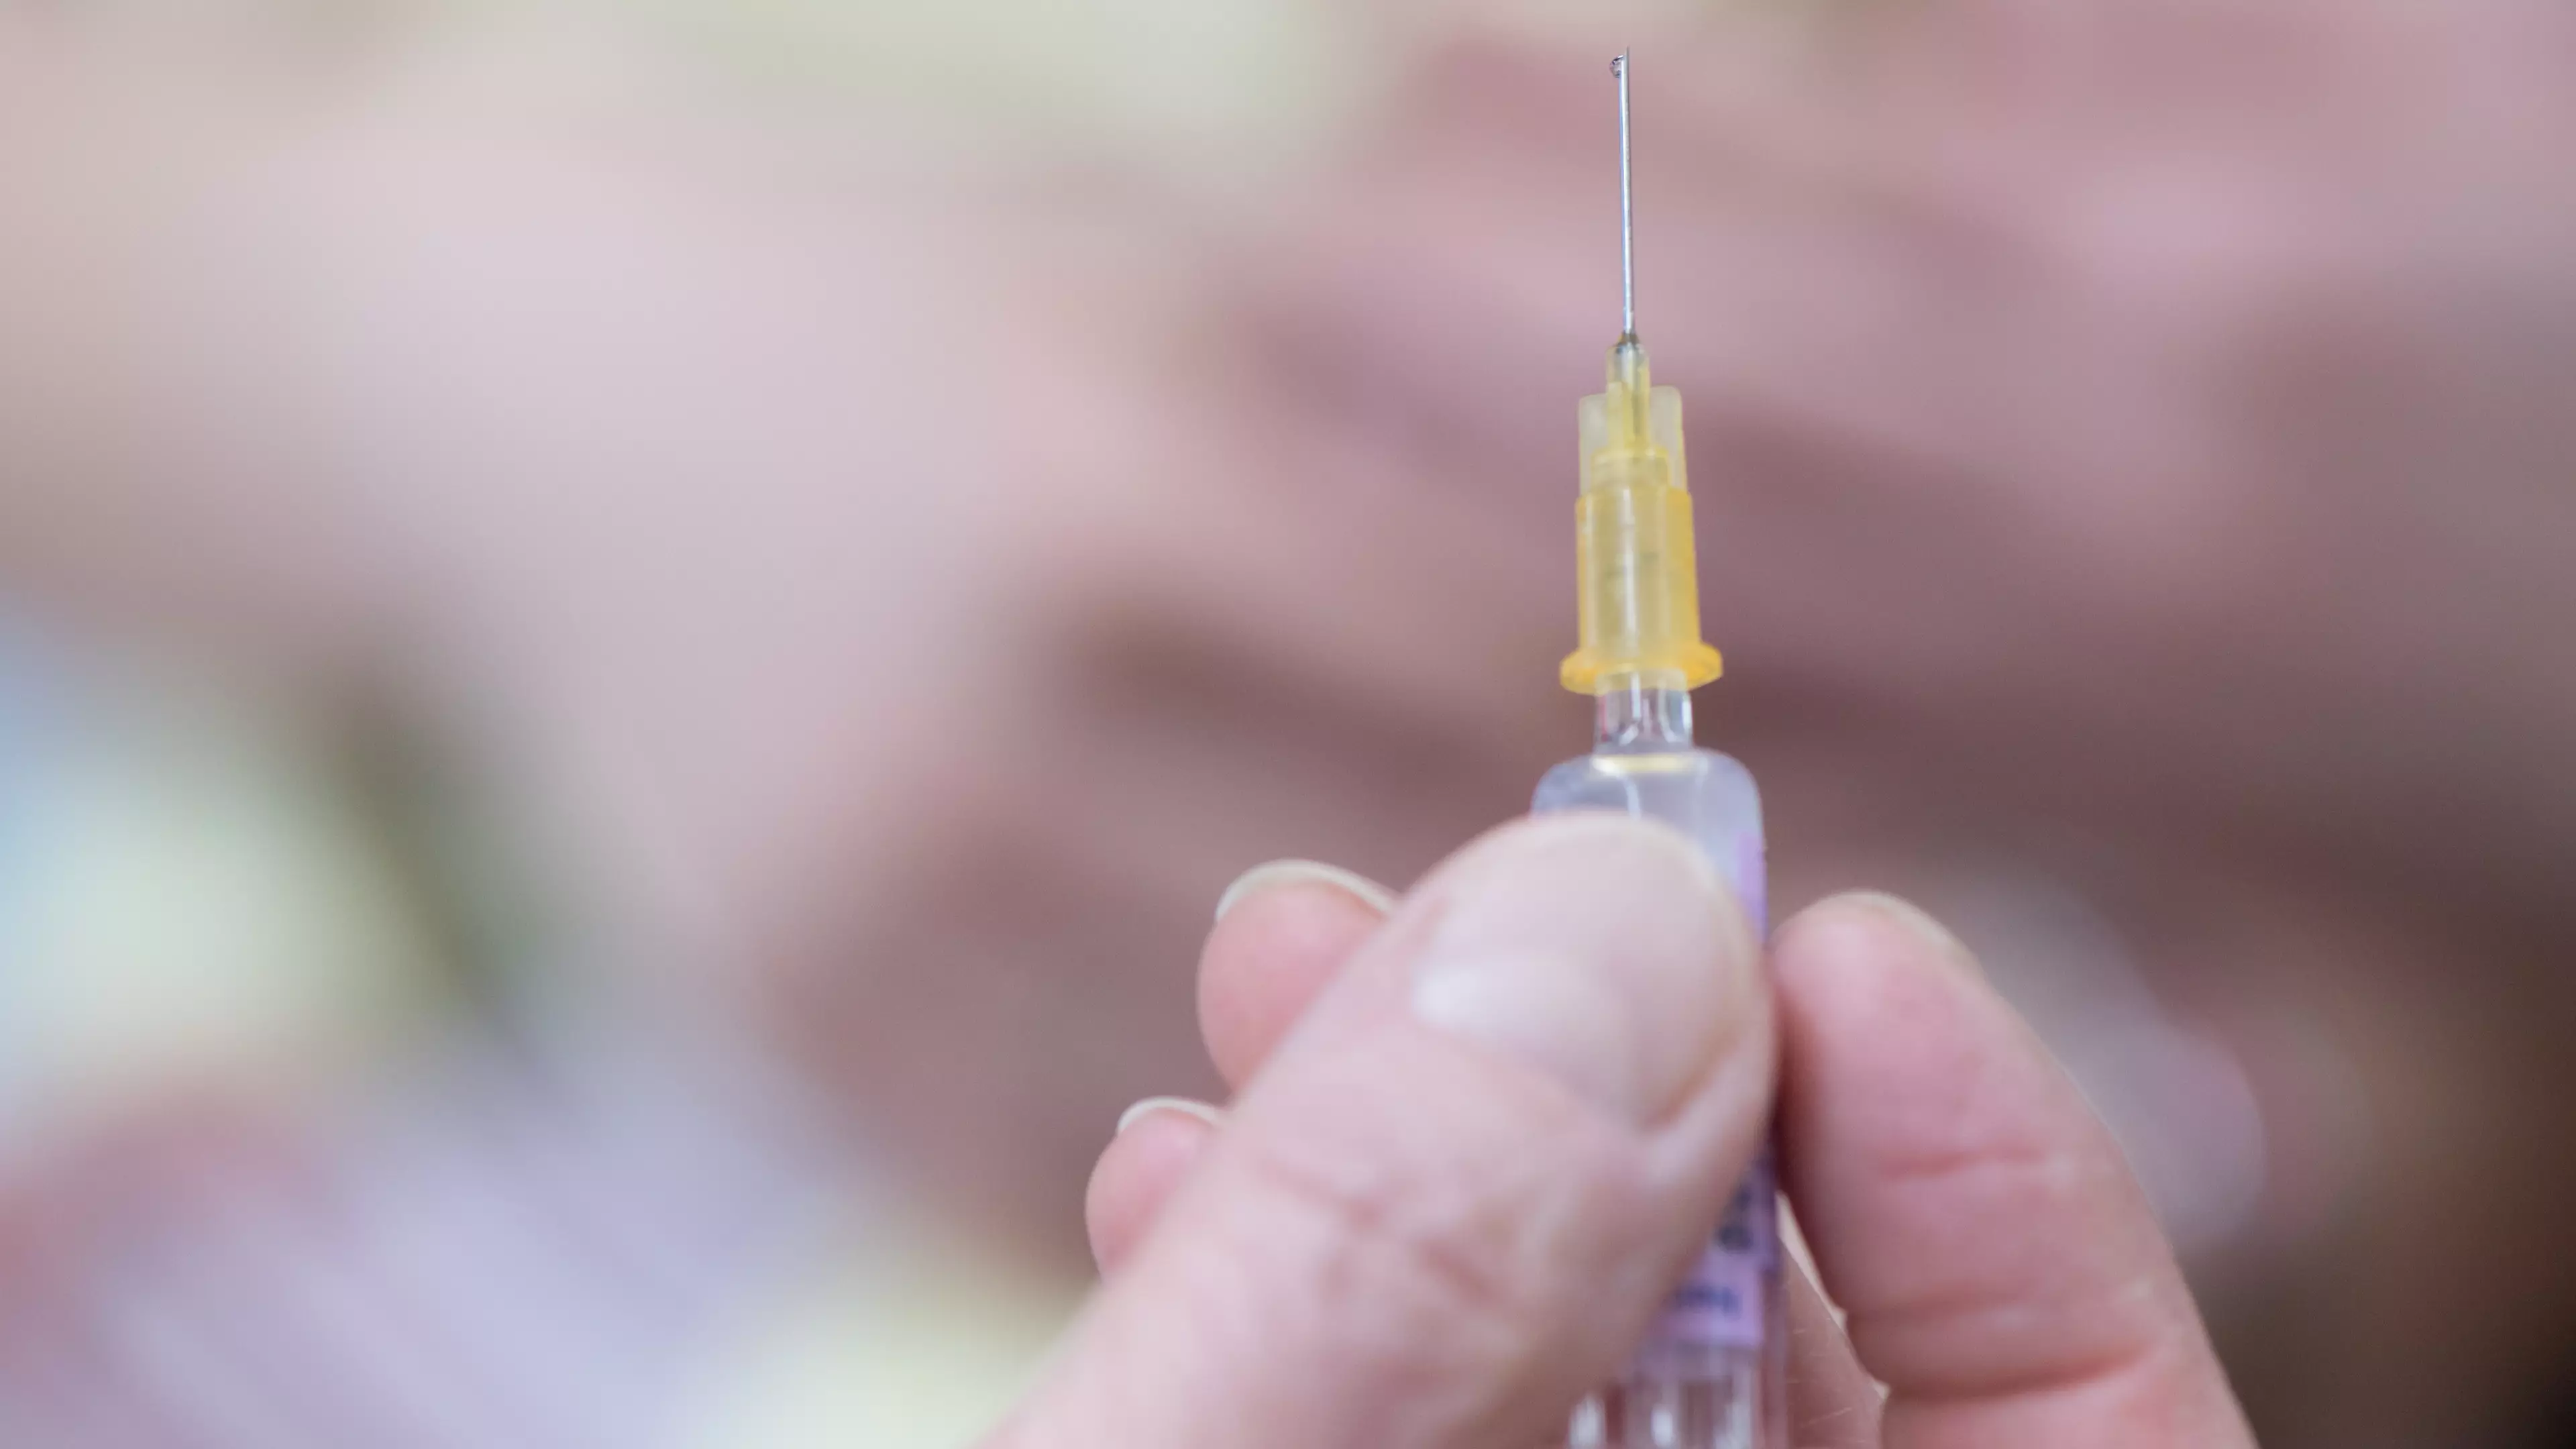 New York County Bans Unvaccinated Kids From Public Places